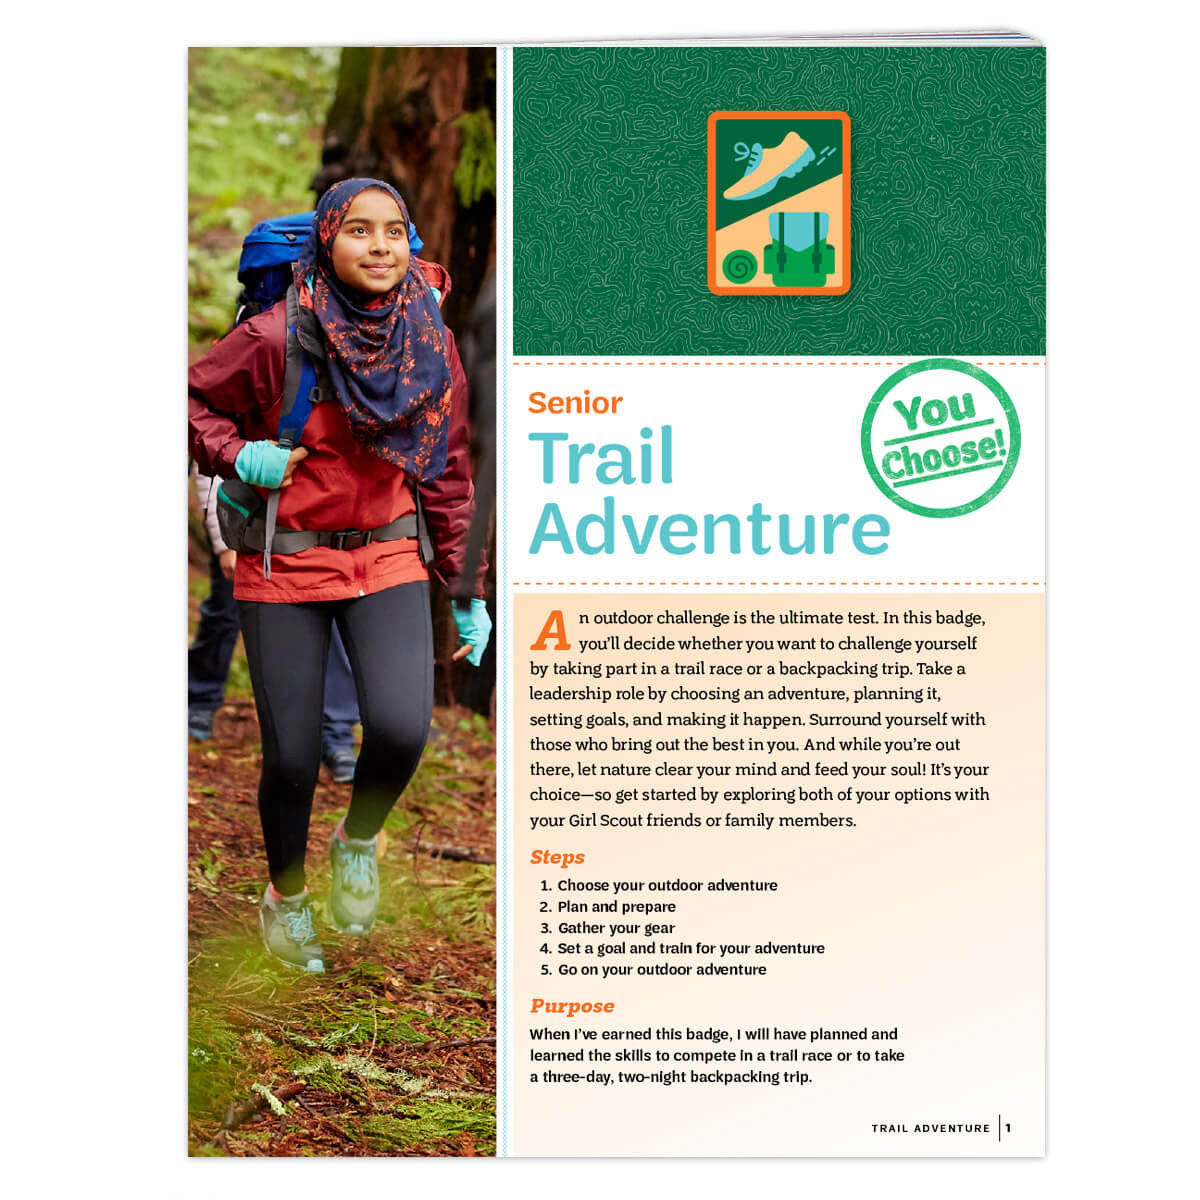 Trail Adventure Badge Requirements